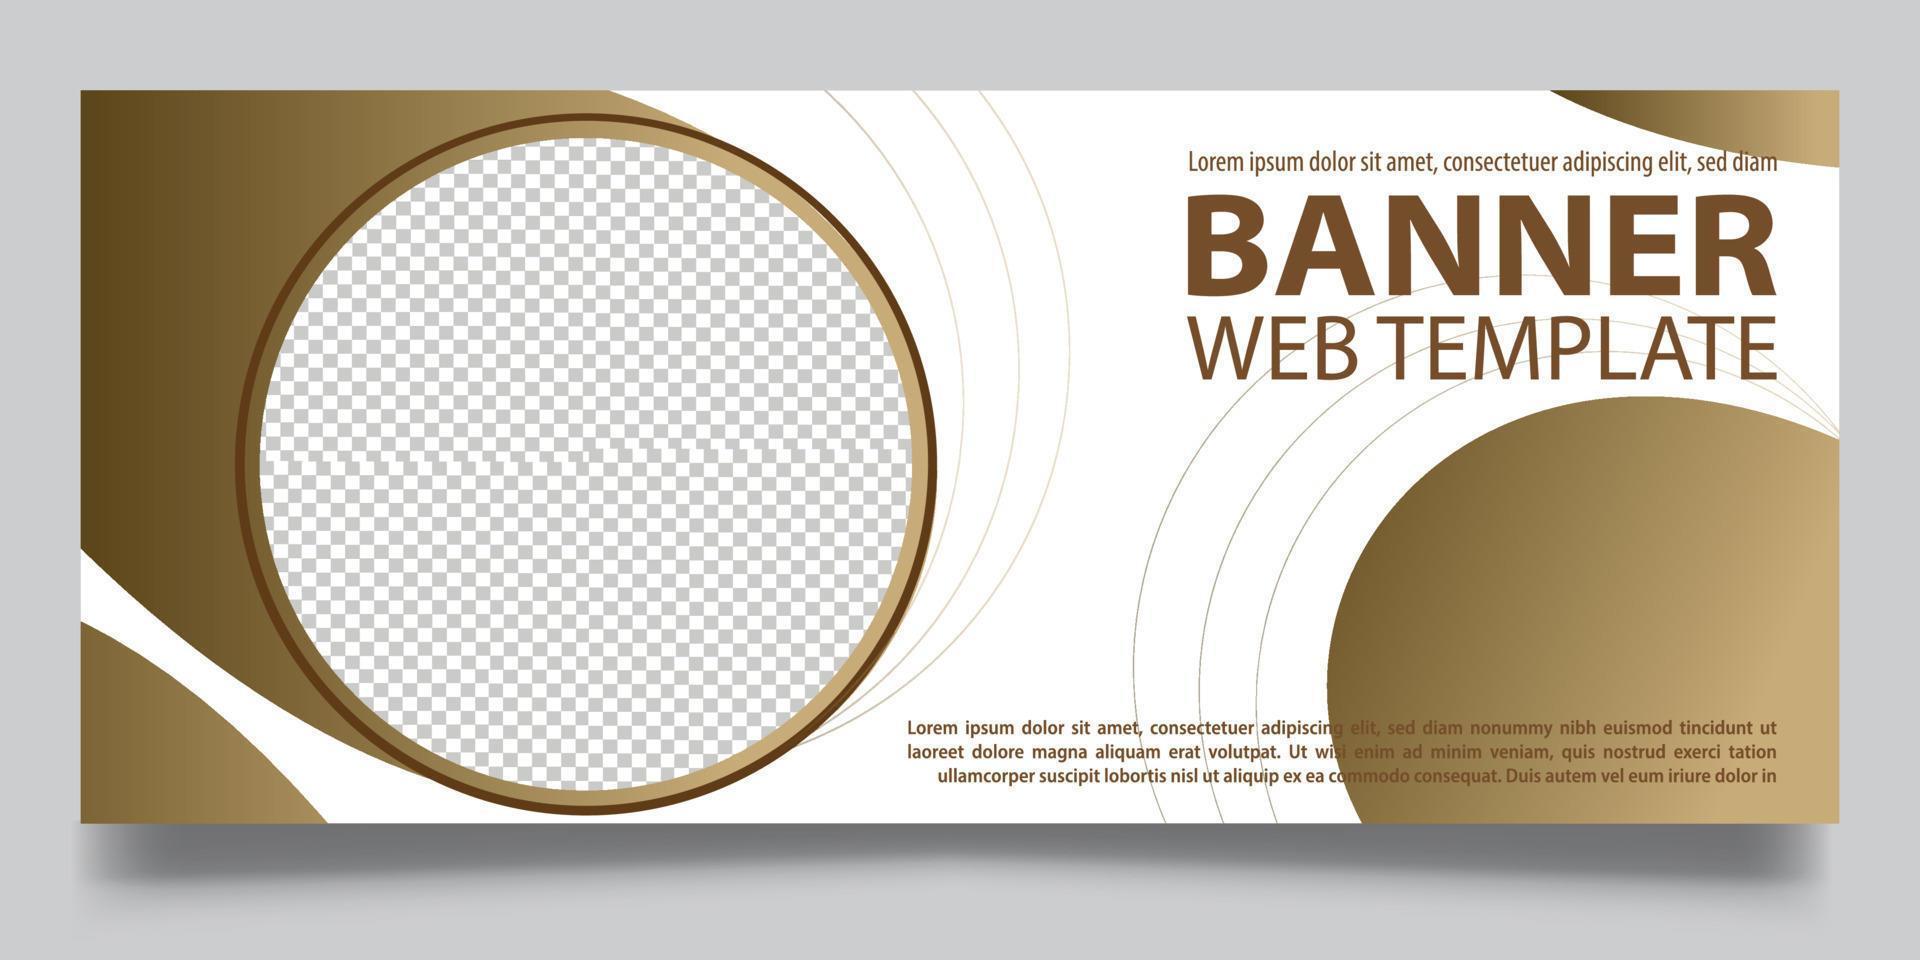 Web banner template for business and finance vector